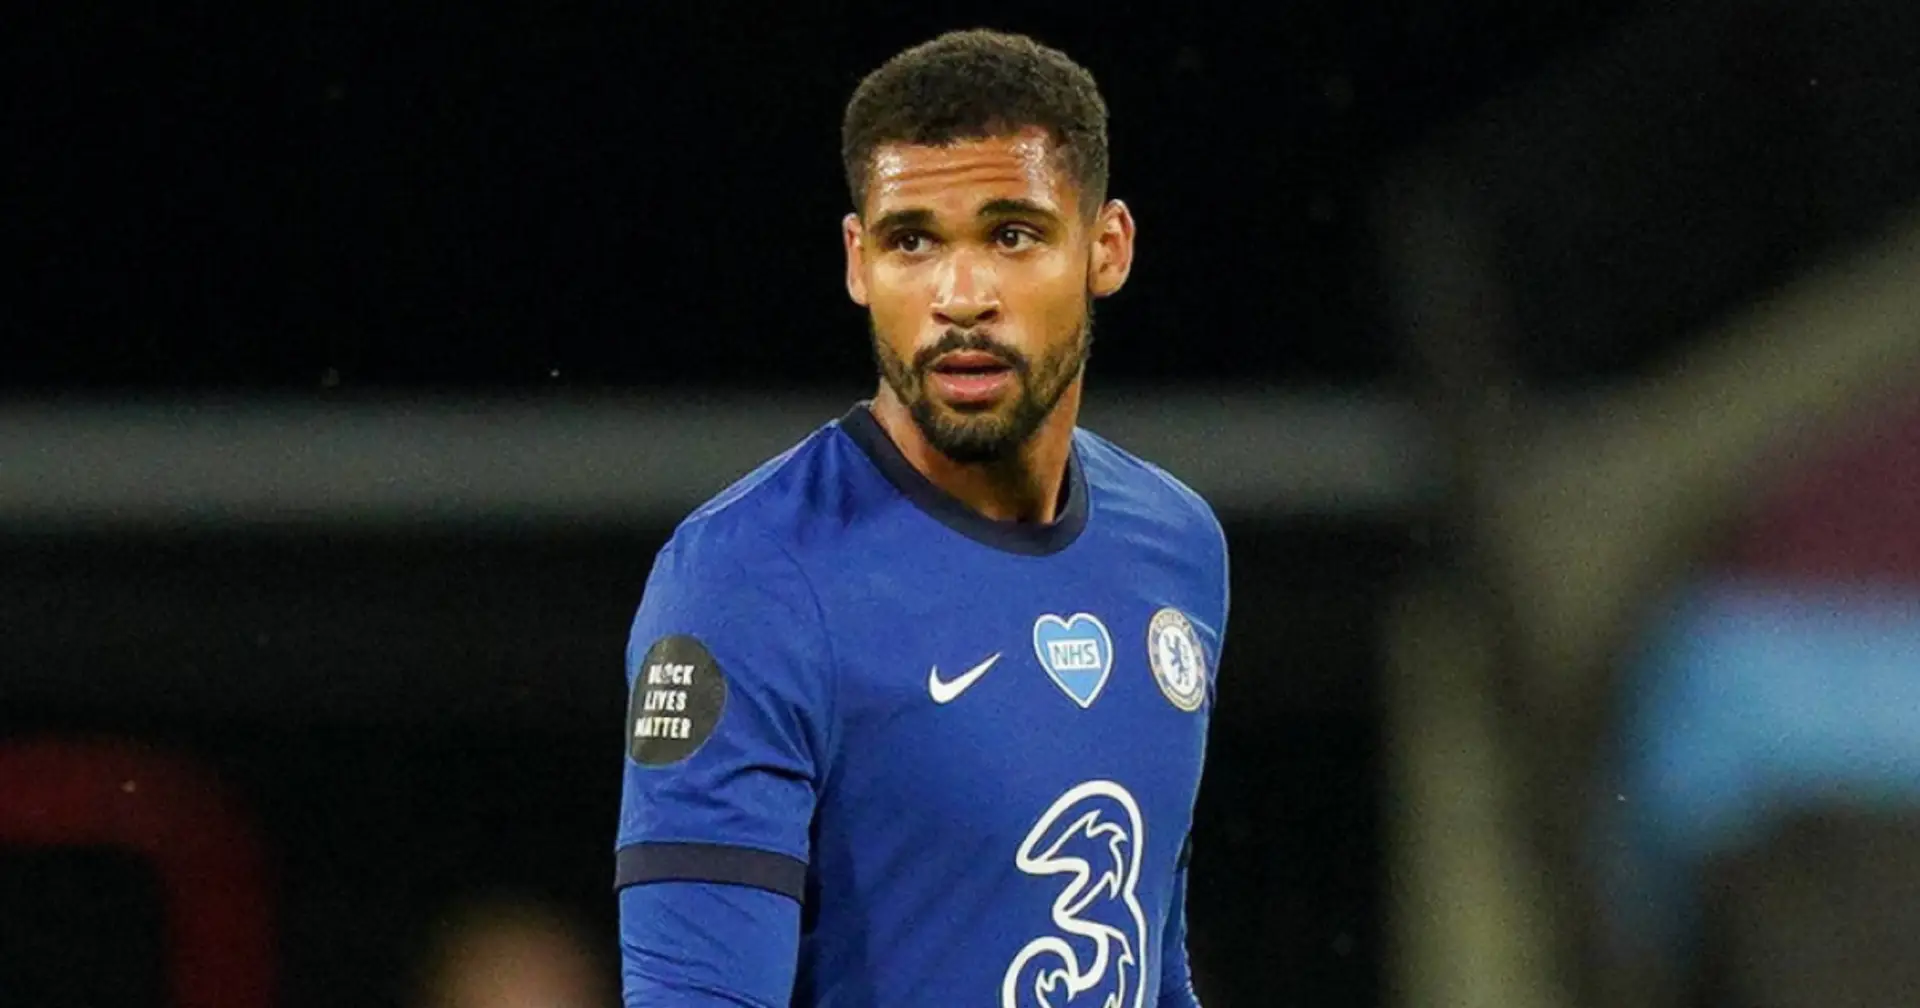 Fabrizio Romano: AC Milan and Chelsea are closing in on Ruben Loftus Cheek deal, fee revealed